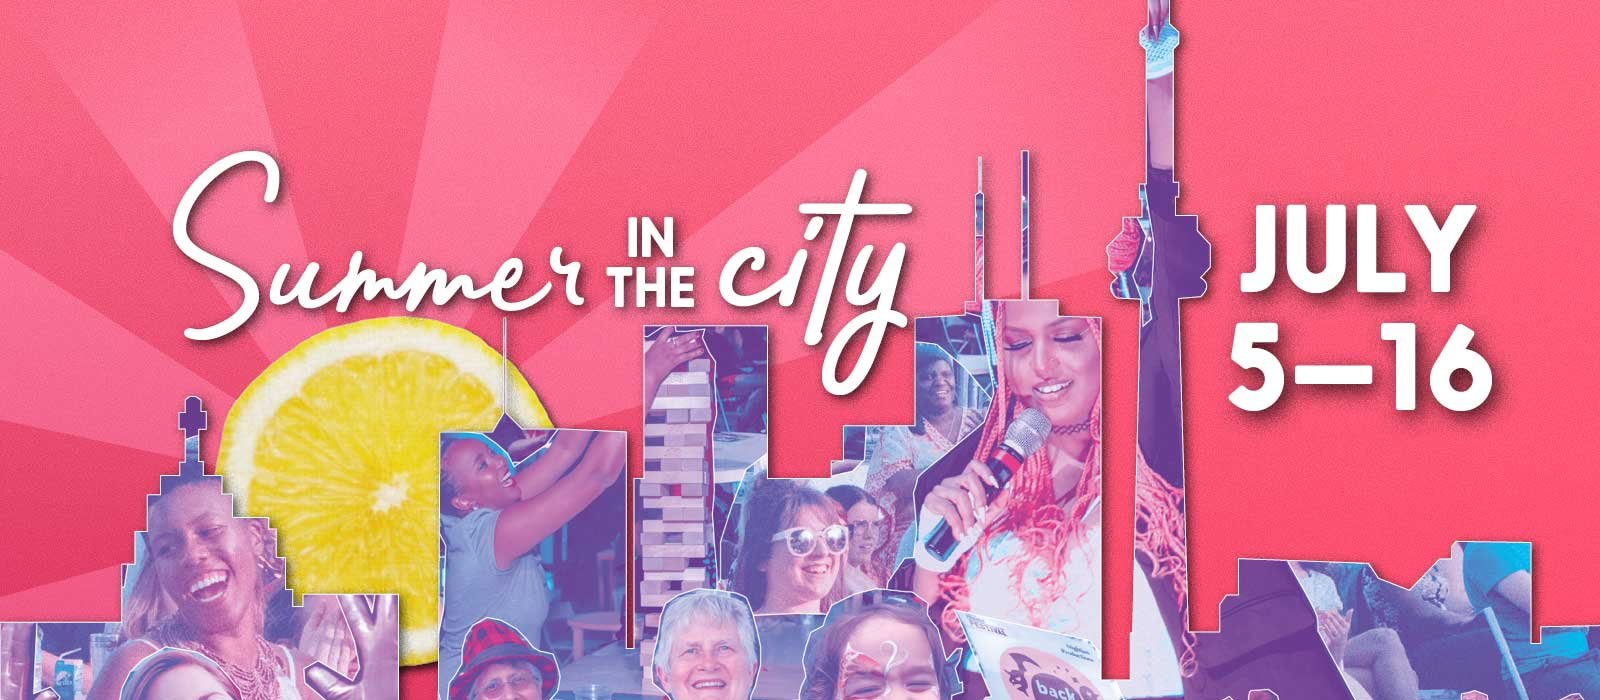 on a pink background, there is a collage of fringe performers, volunteers, and patrons made into the shape of the toronto skyline, with a lemon as the sun.